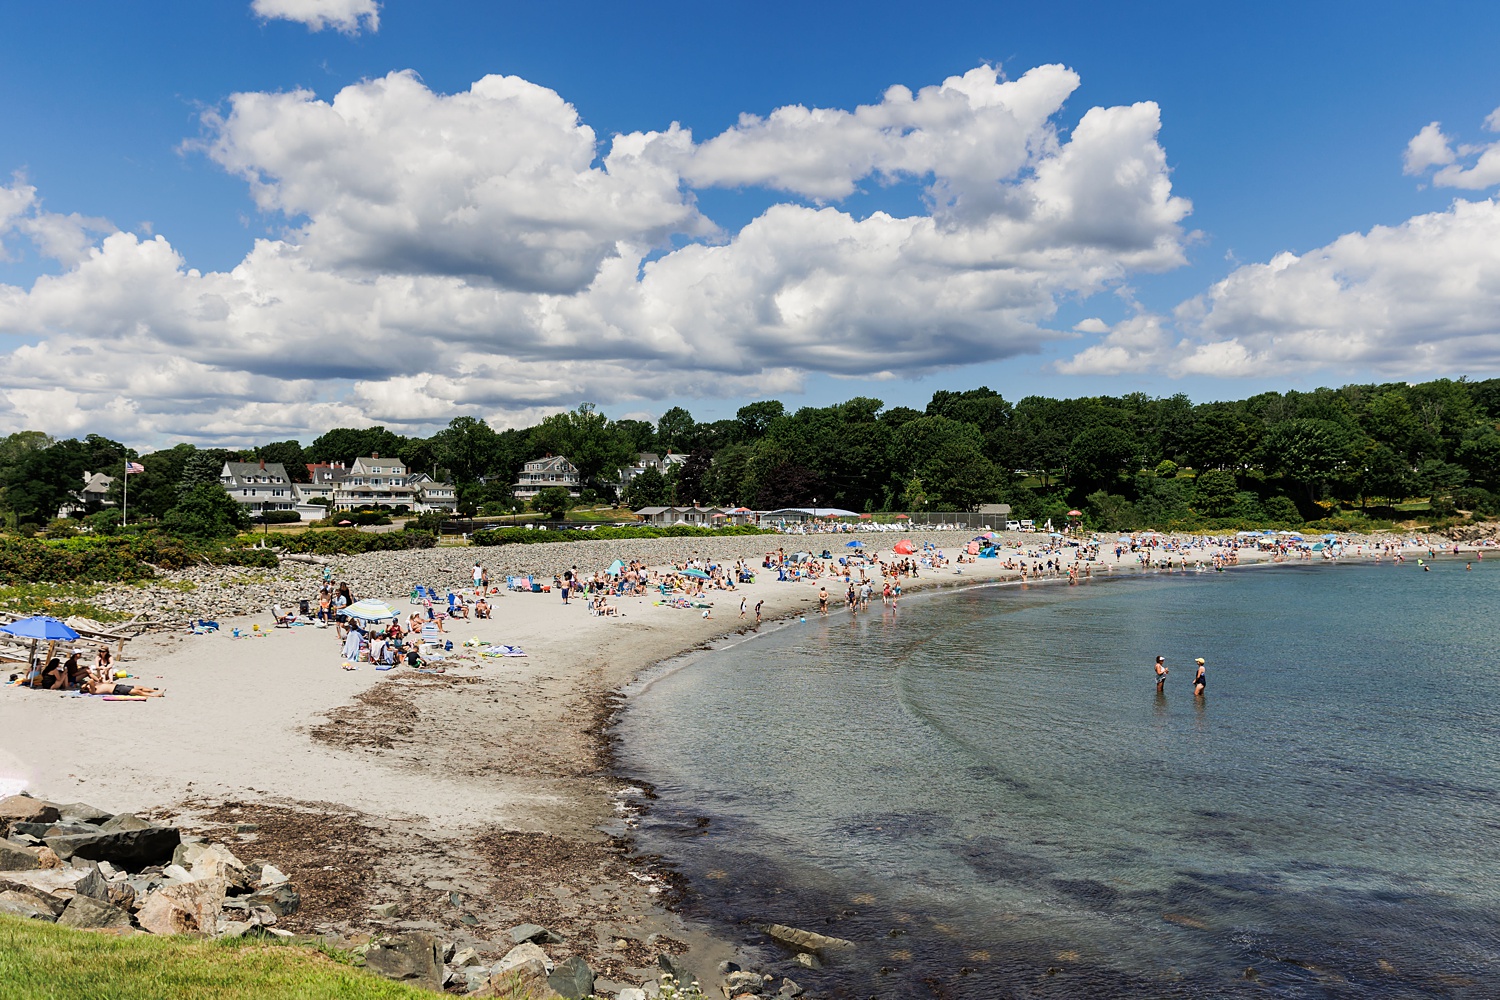 The beach at Stageneck Inn Maine